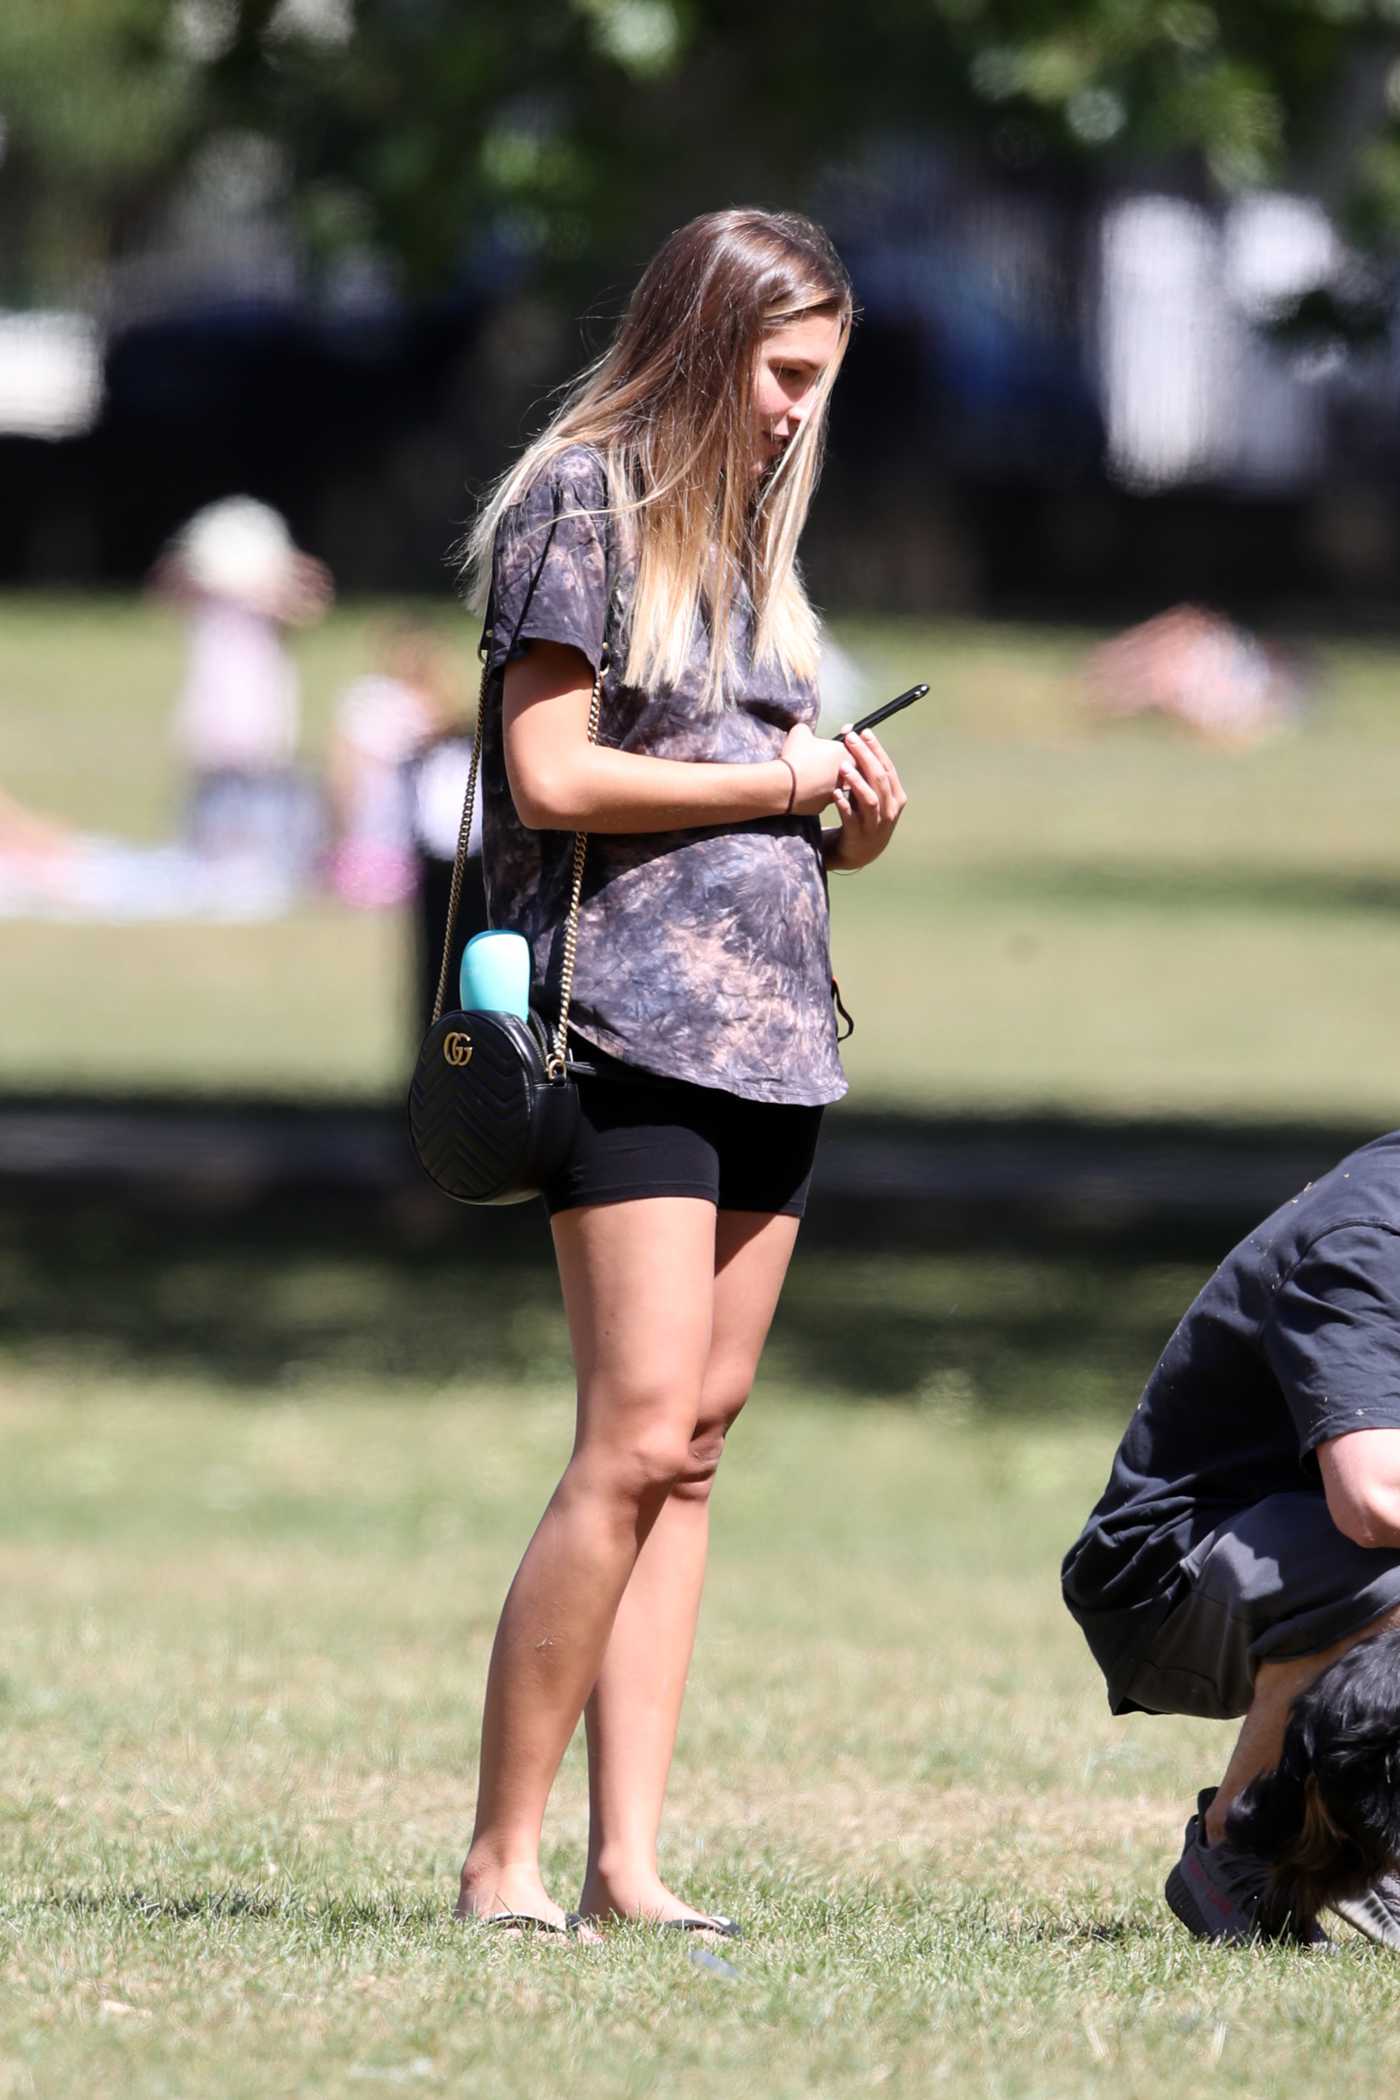 Zara McDermott in a Black Spandex Shorts Was Seen Out with Sam Thompson in London 05/28/2020